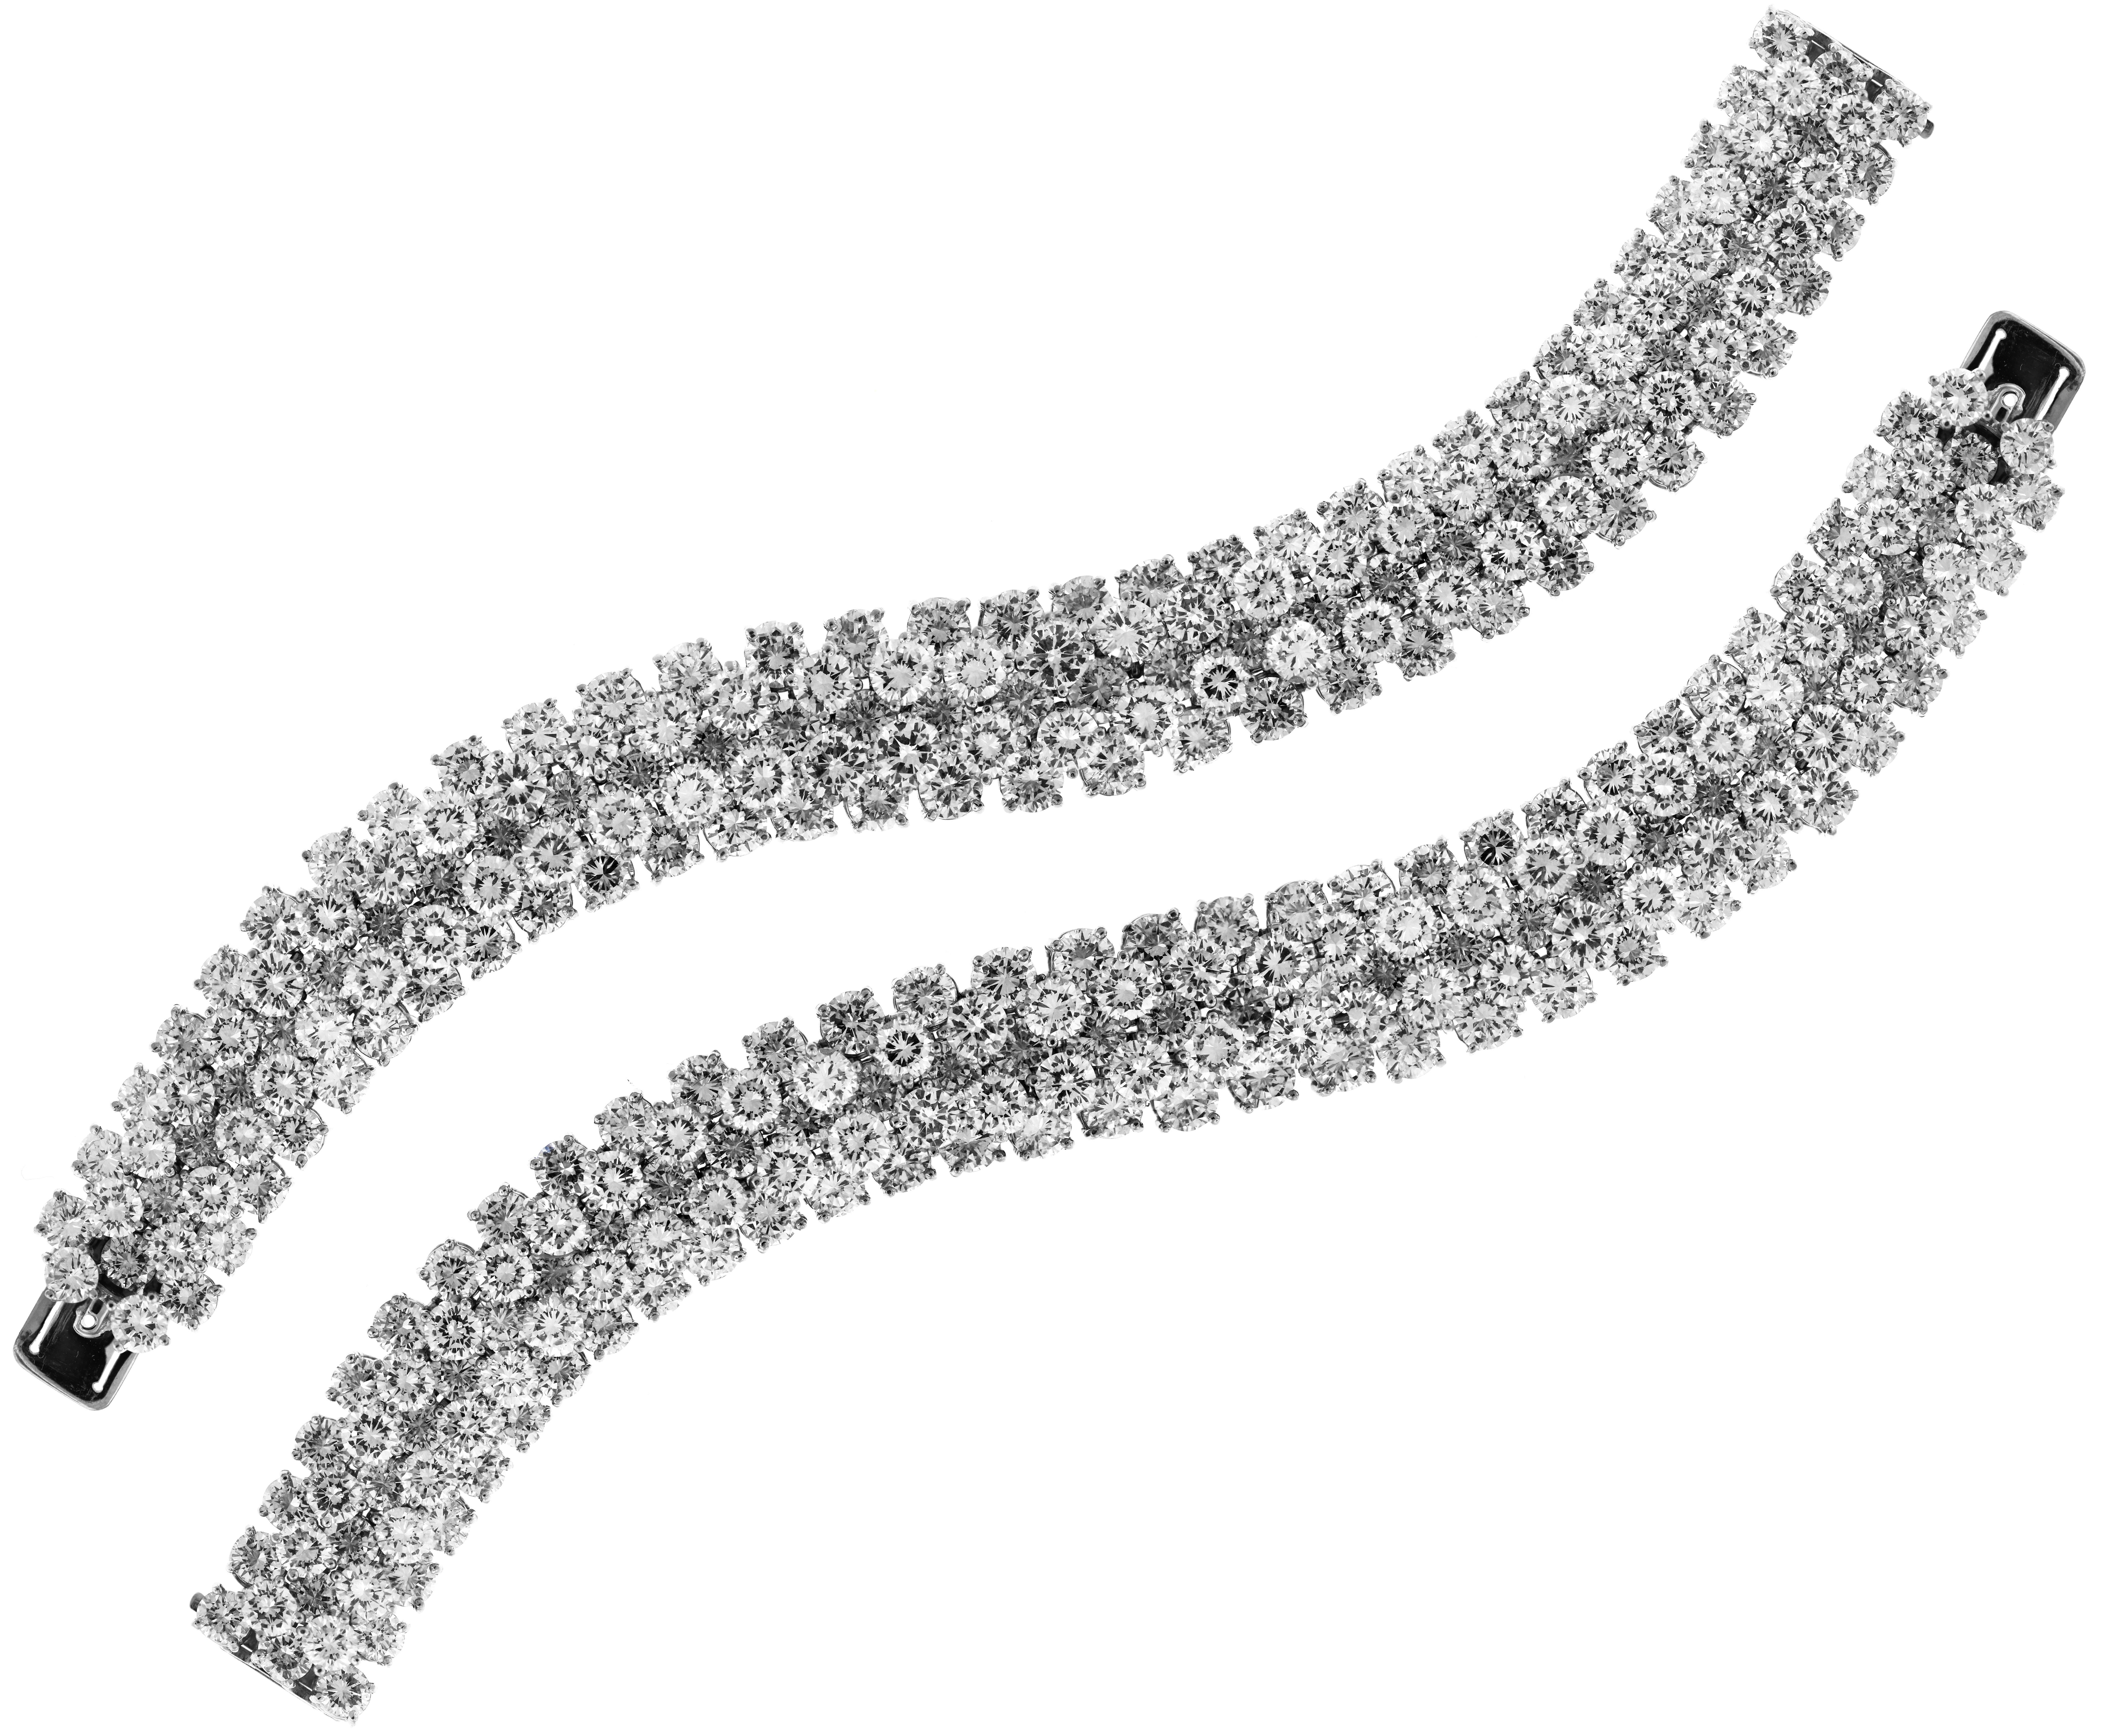 85 carat Diamond Choker Necklace transferrable to two bracelets made in Platinum

This state of the art choker necklace gives multiple uses as this can easily be transferred to become two bracelets

Apprx. 85 carat F-G color, VS1-VS2 clarity white